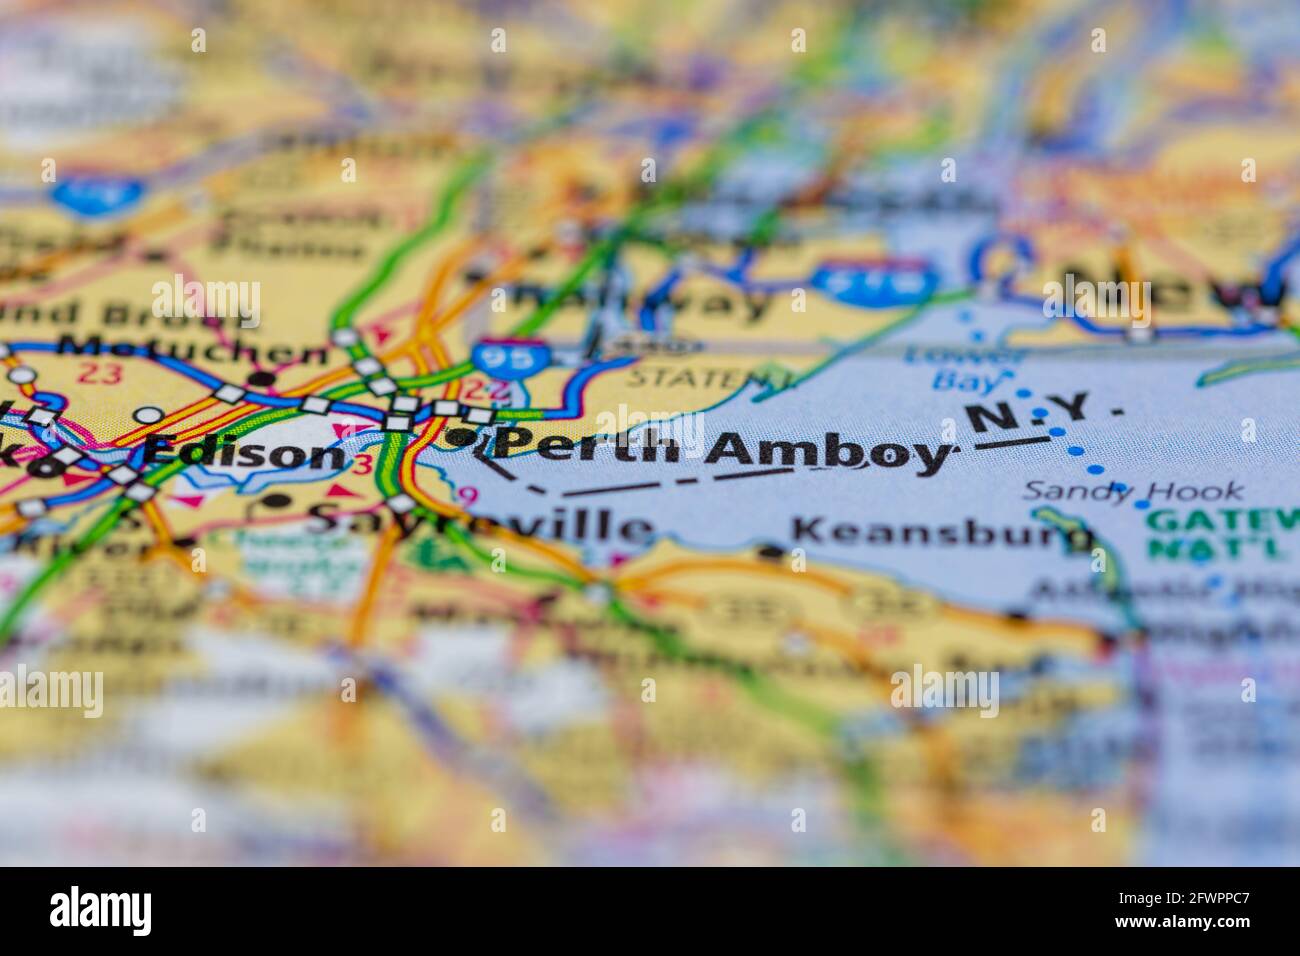 Perth Amboy New Jersey USA shown on a Geography map or road map Stock Photo